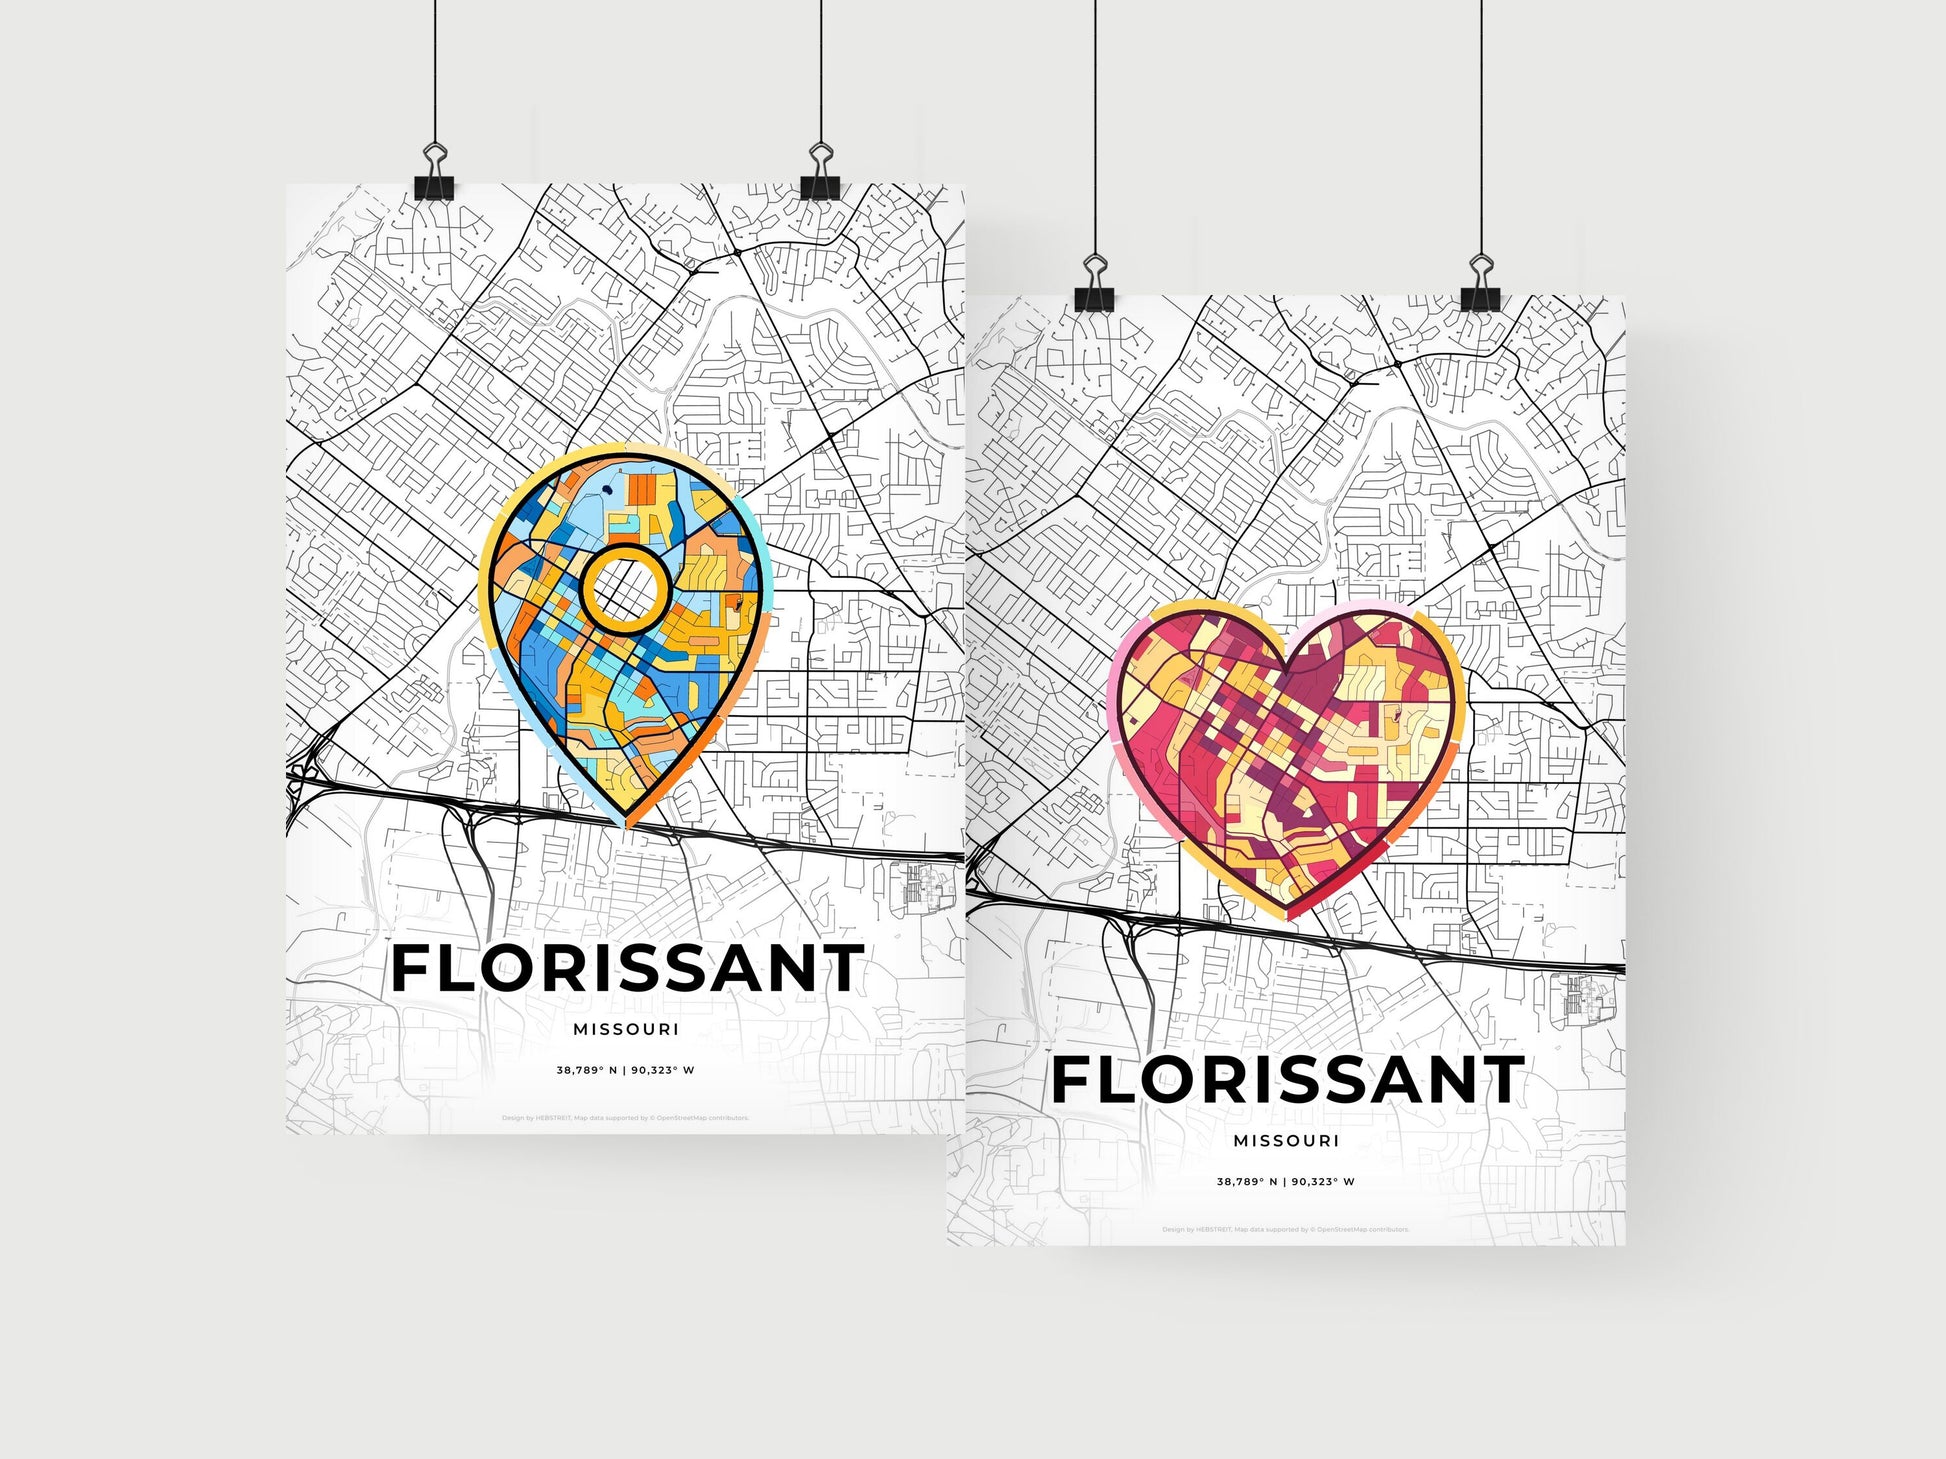 FLORISSANT MISSOURI minimal art map with a colorful icon. Where it all began, Couple map gift.